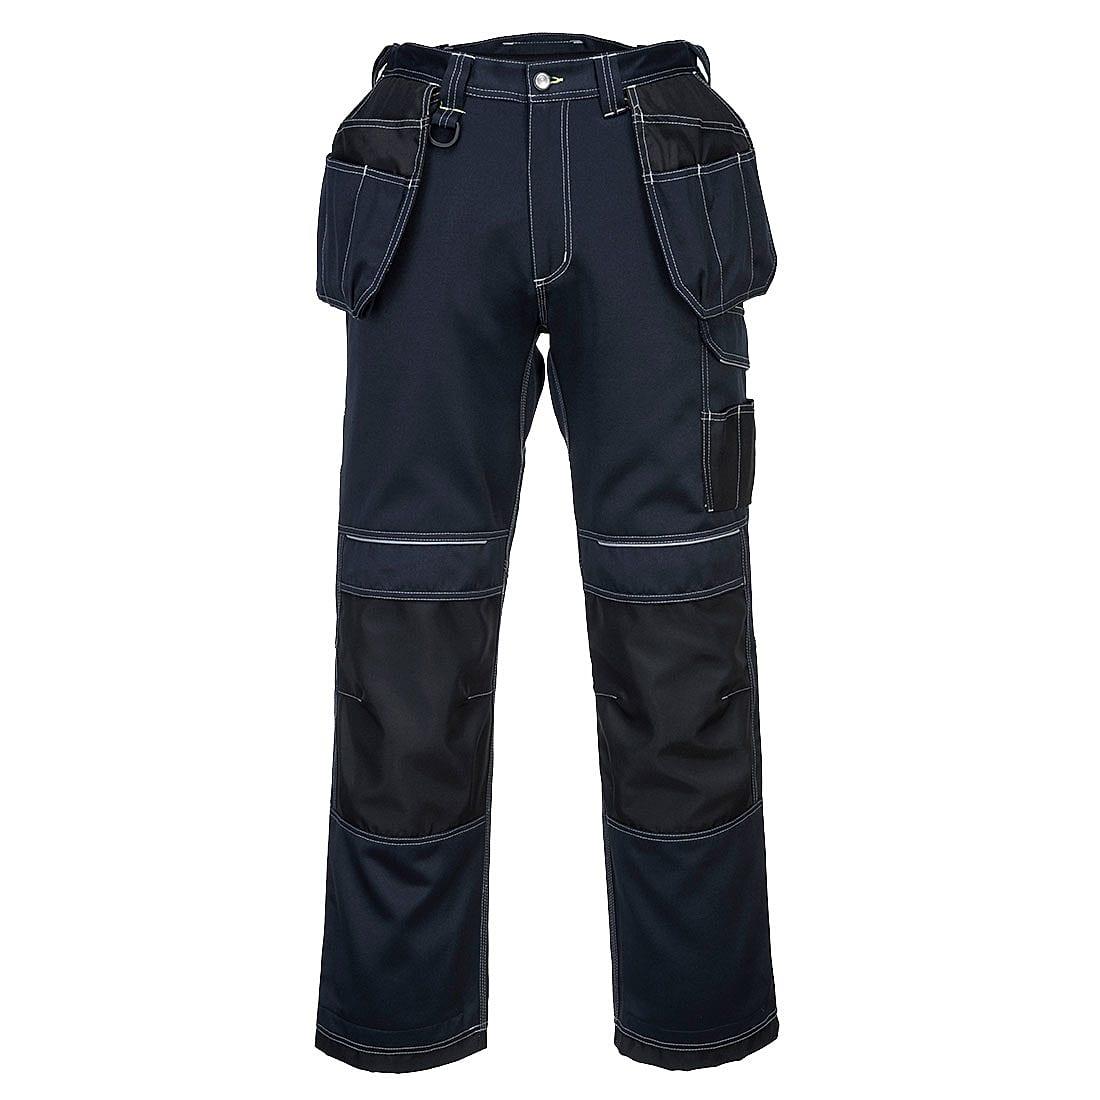 Portwest PW3 Holster Work Trousers in Navy / Black (Product Code: T602)